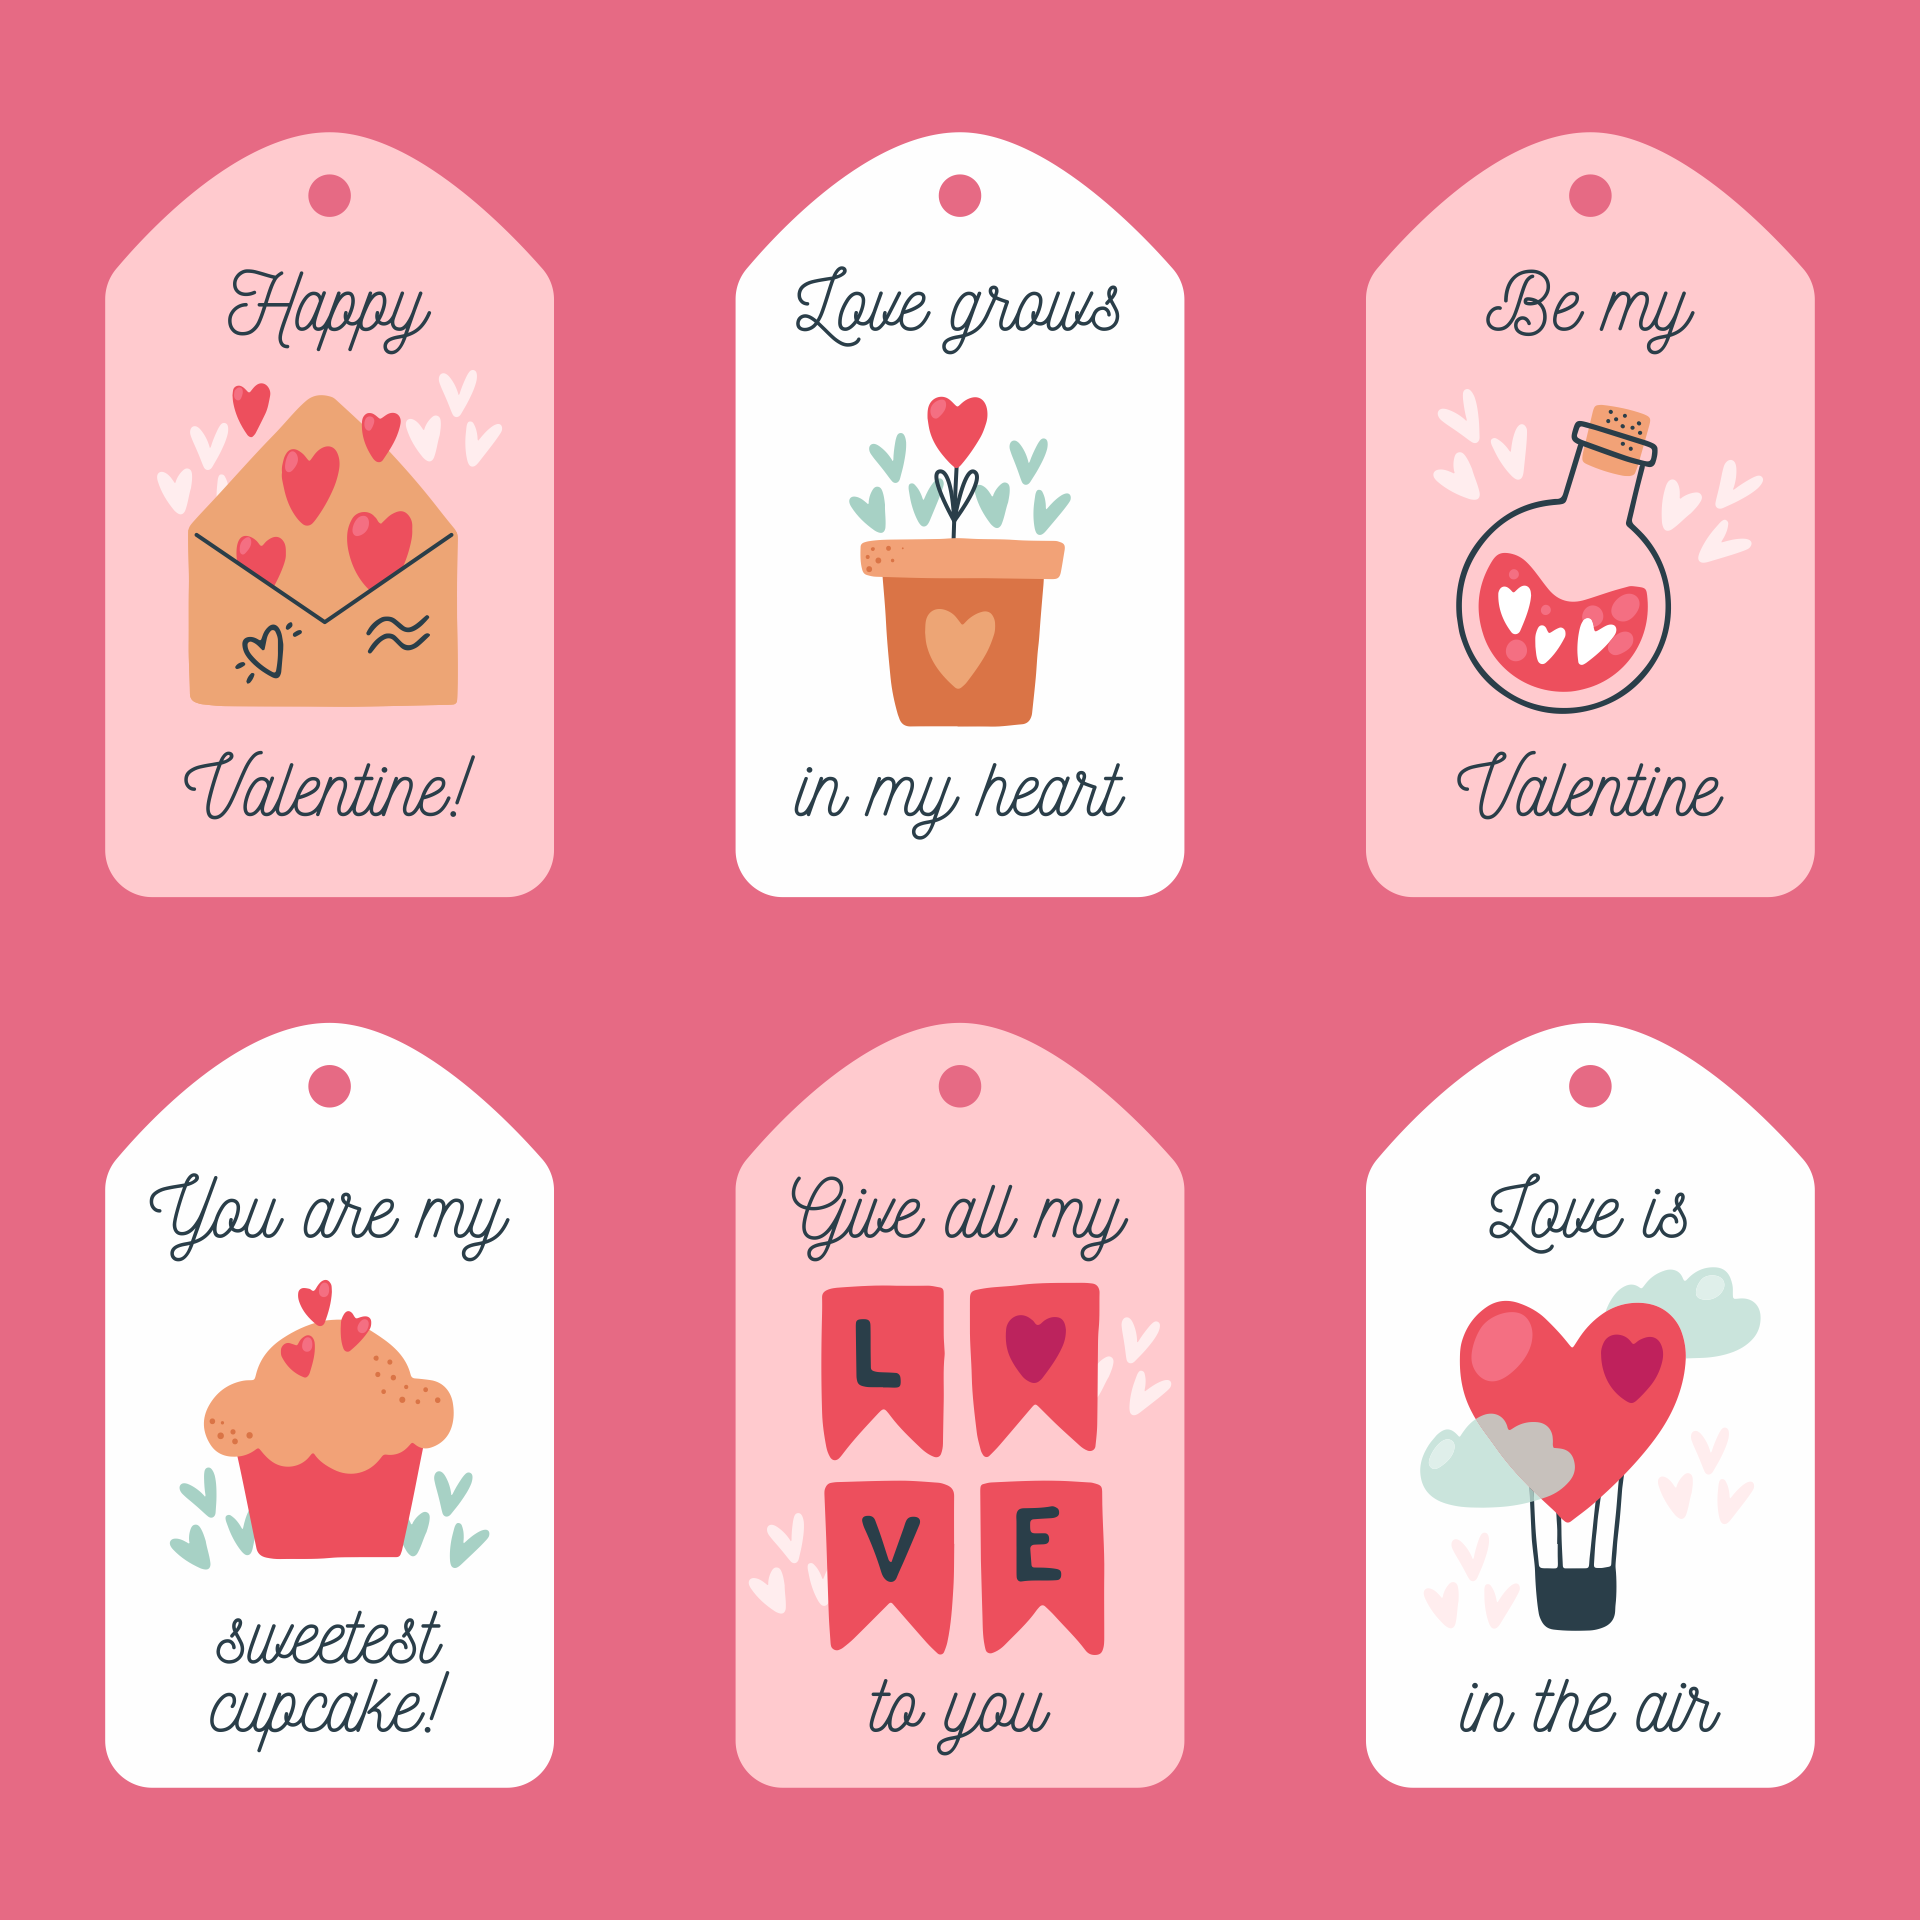 bubbles-valentine-printable-a-free-printable-valentines-day-idea-that